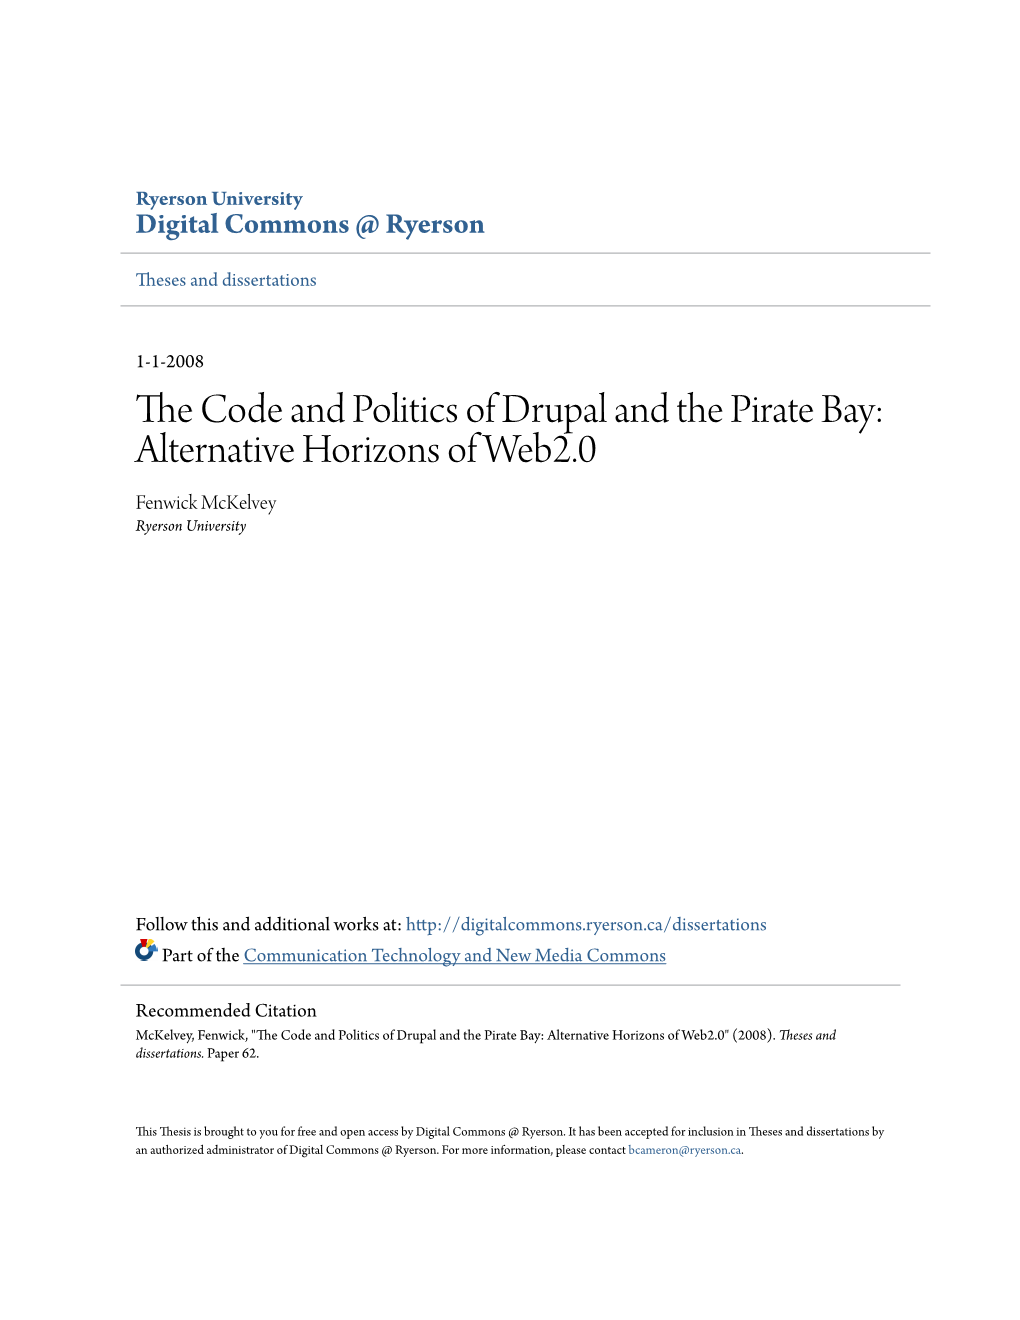 The Code and Politics of Drupal and the Pirate Bay: Alternative Horizons of Web2.0